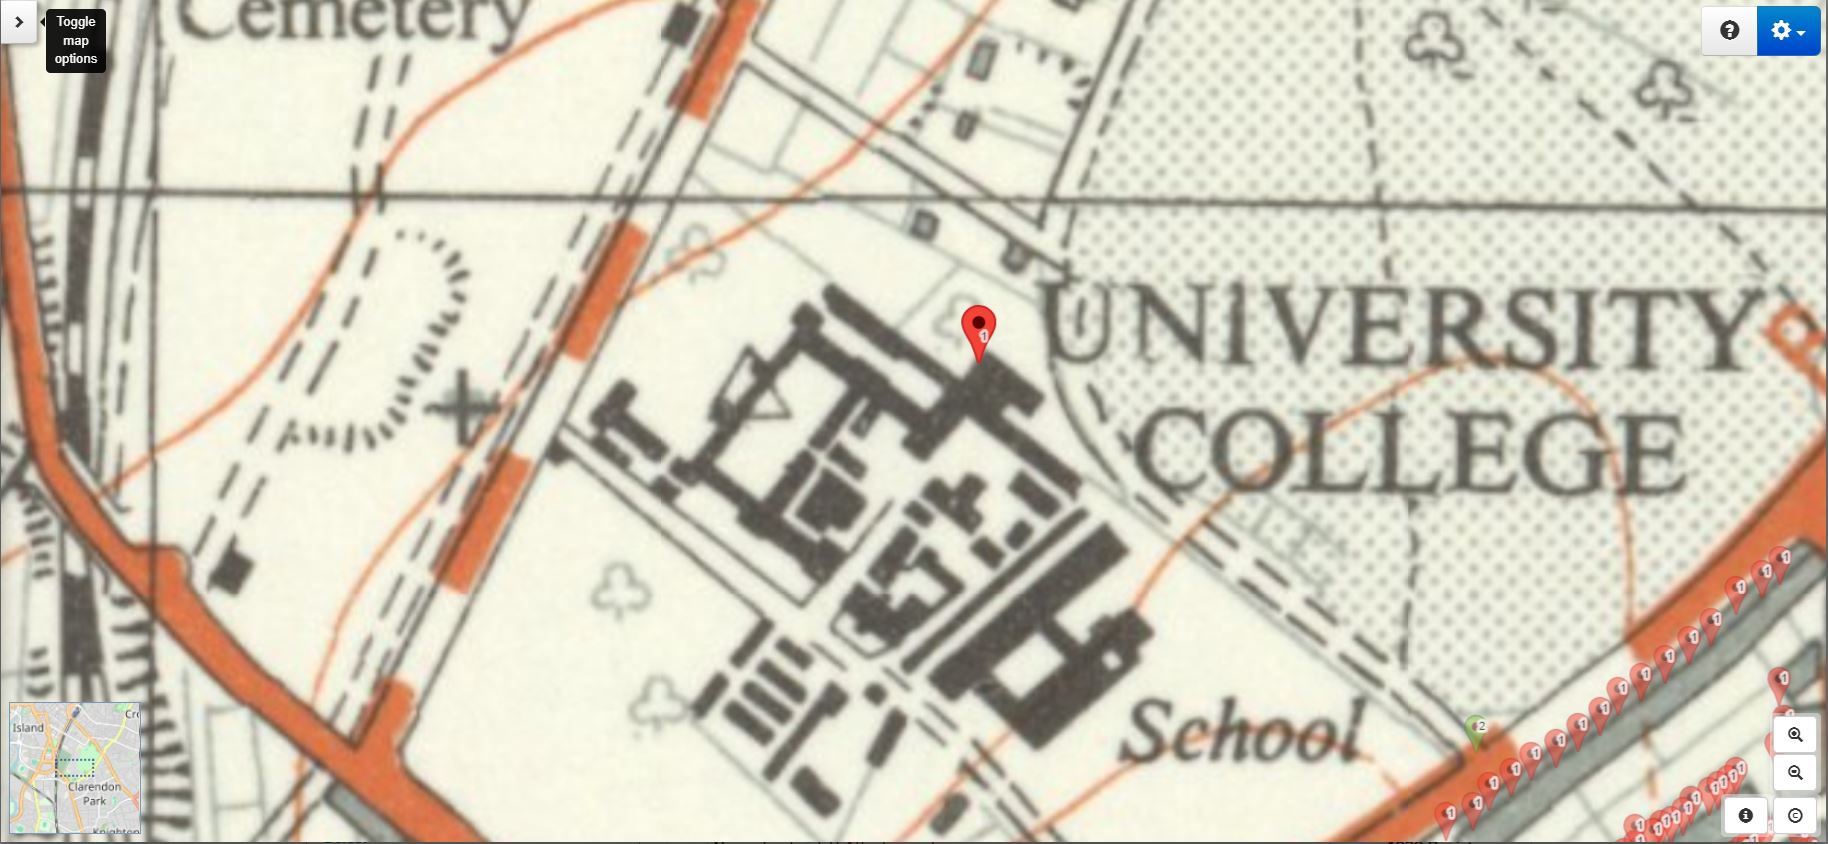 University College shown on the 1937-1961 OS Map on Map Explorer™